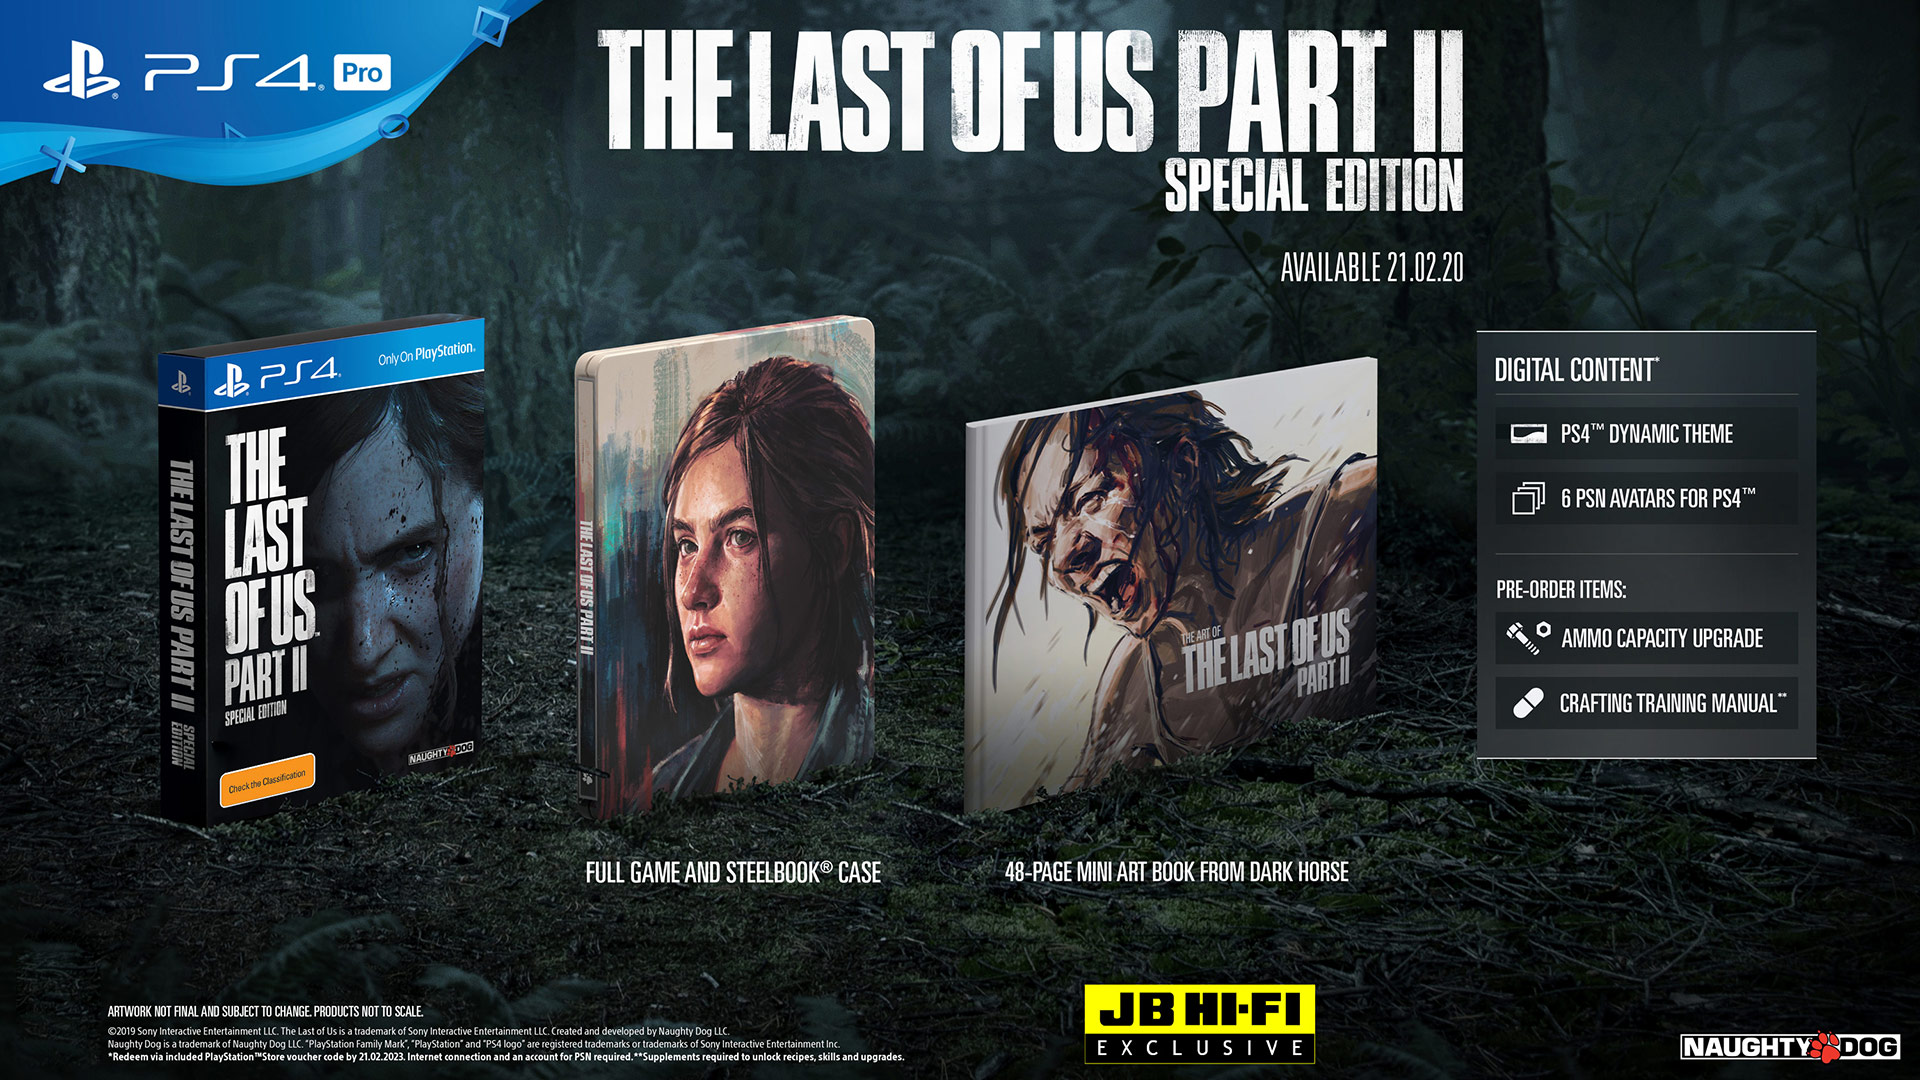 Is the Last of Us Part II Too Dark? - The Game Fanatics